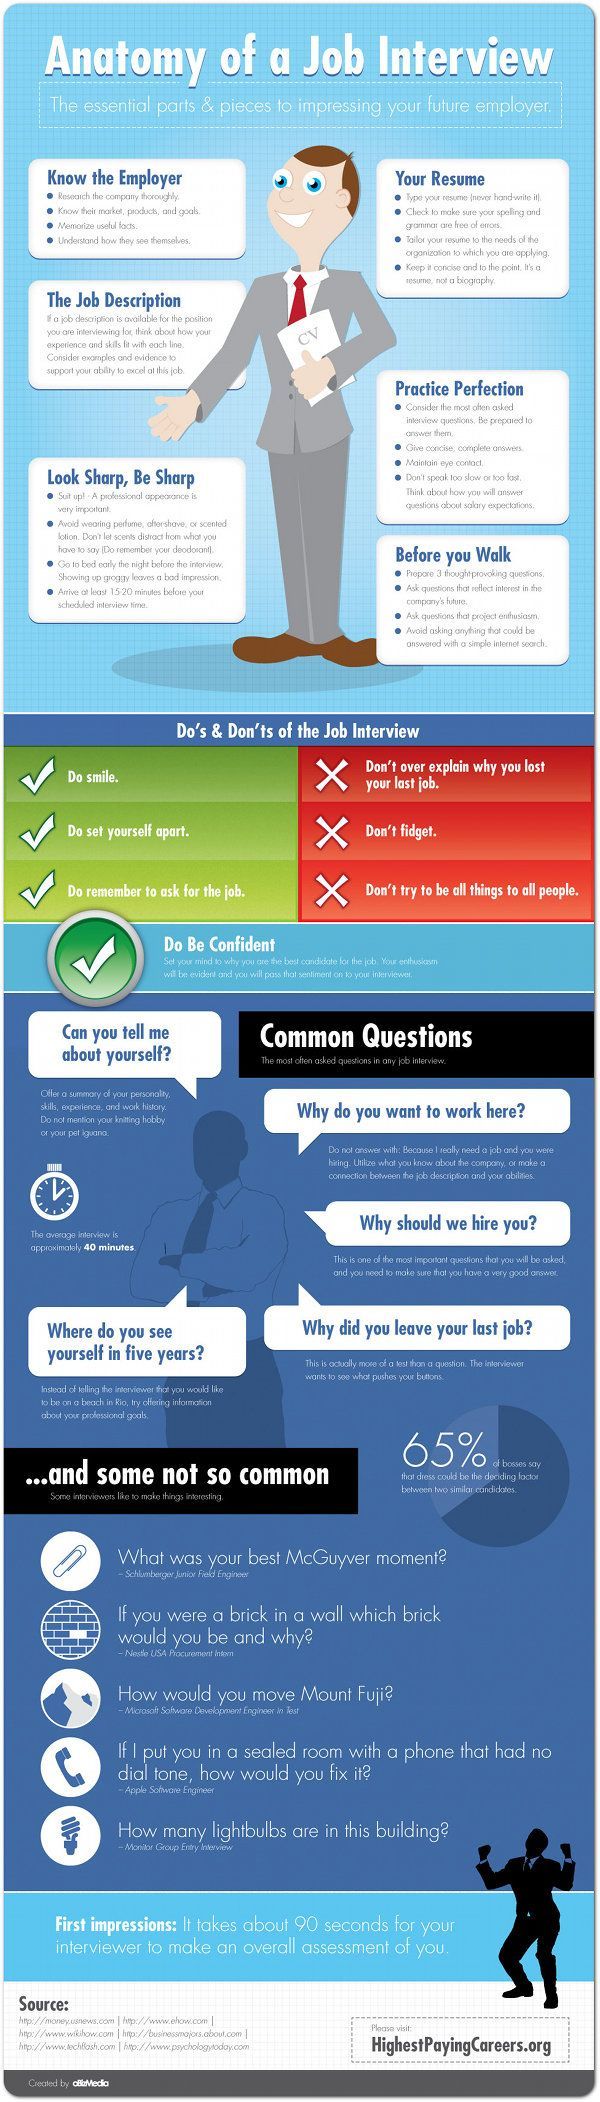 Anatomy of a Job Interview [Infographic].